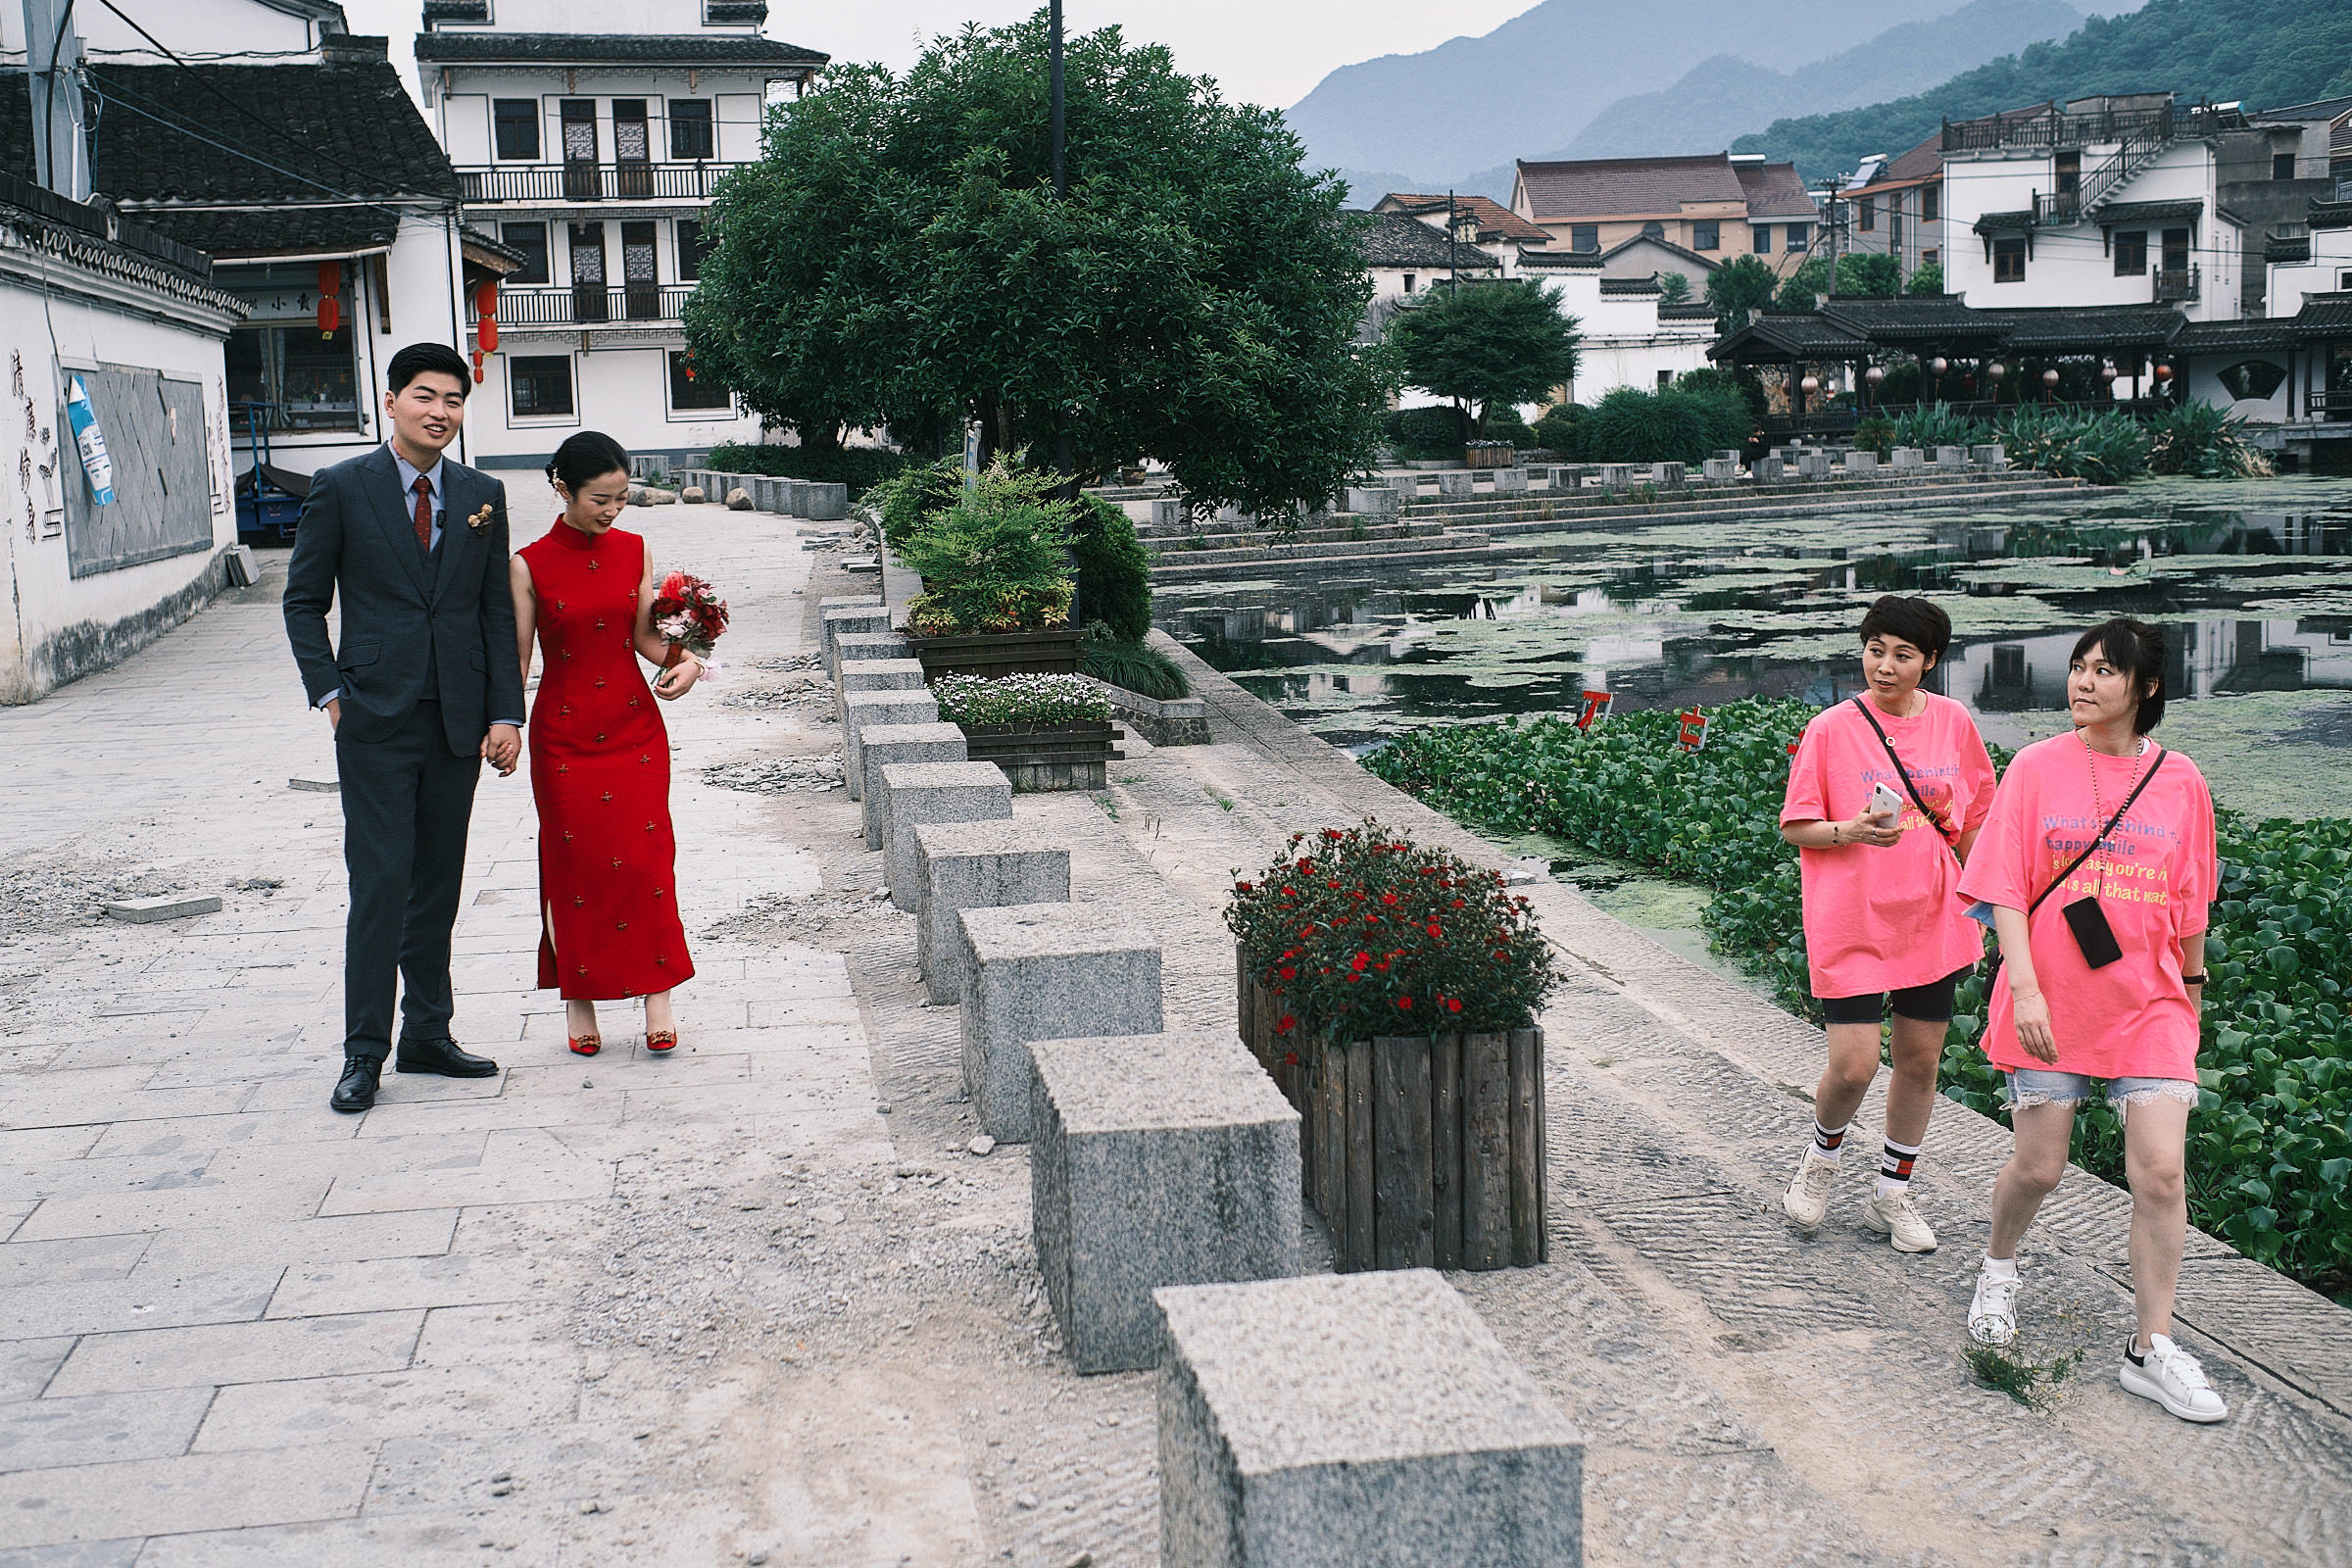 Bride Dressed In Red And Groom Stand Next To The Lake As Tourists Dressed In Pink Pass By